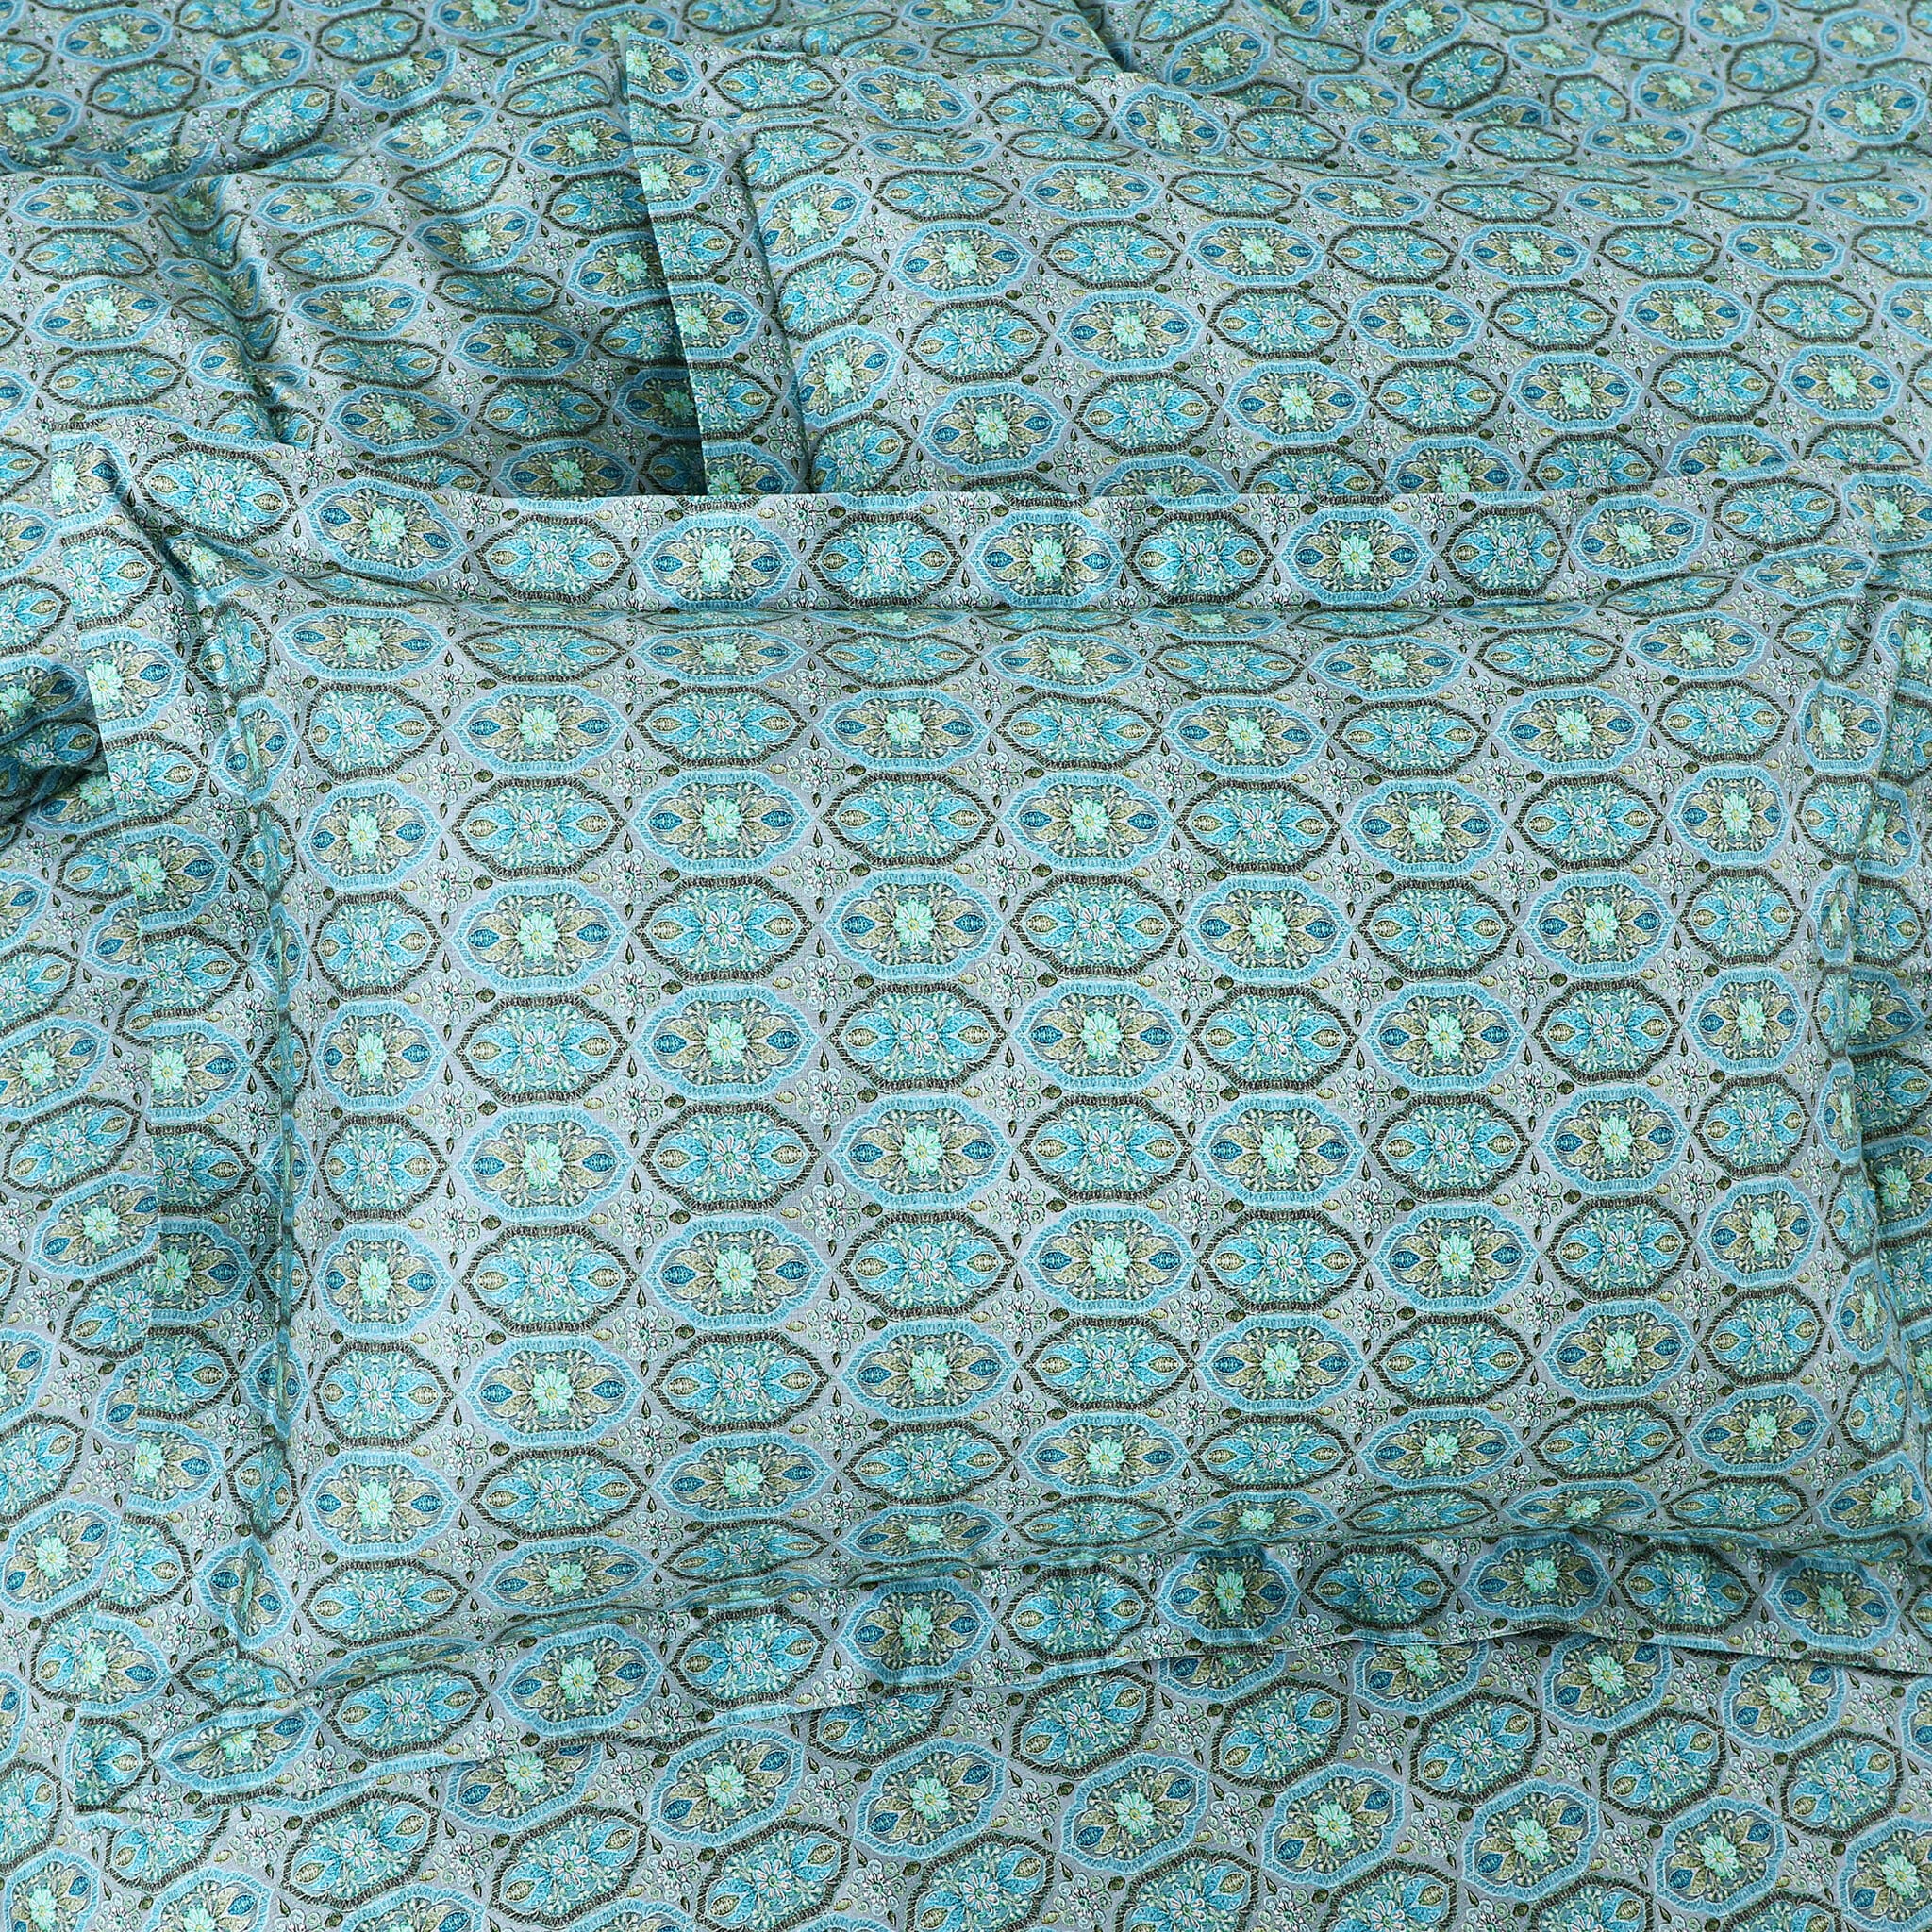 Malako Basel Turquoise Blue Abstract 350 TC 100% Cotton King Size Bedsheet/Duvet Cover